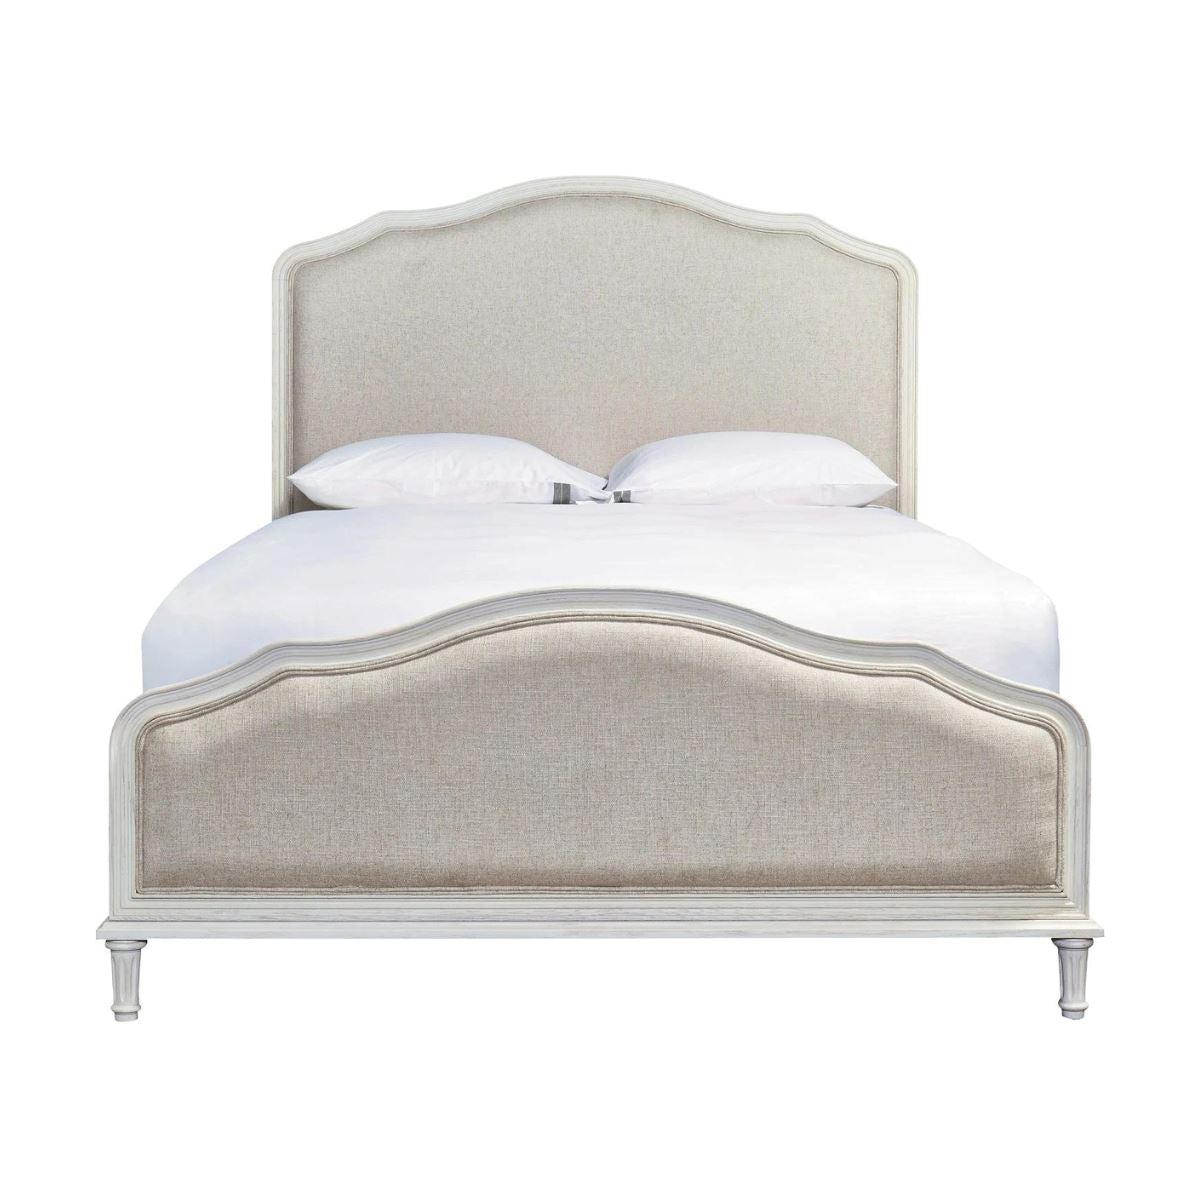 Abigail Bed Frame - Queen. Front view.